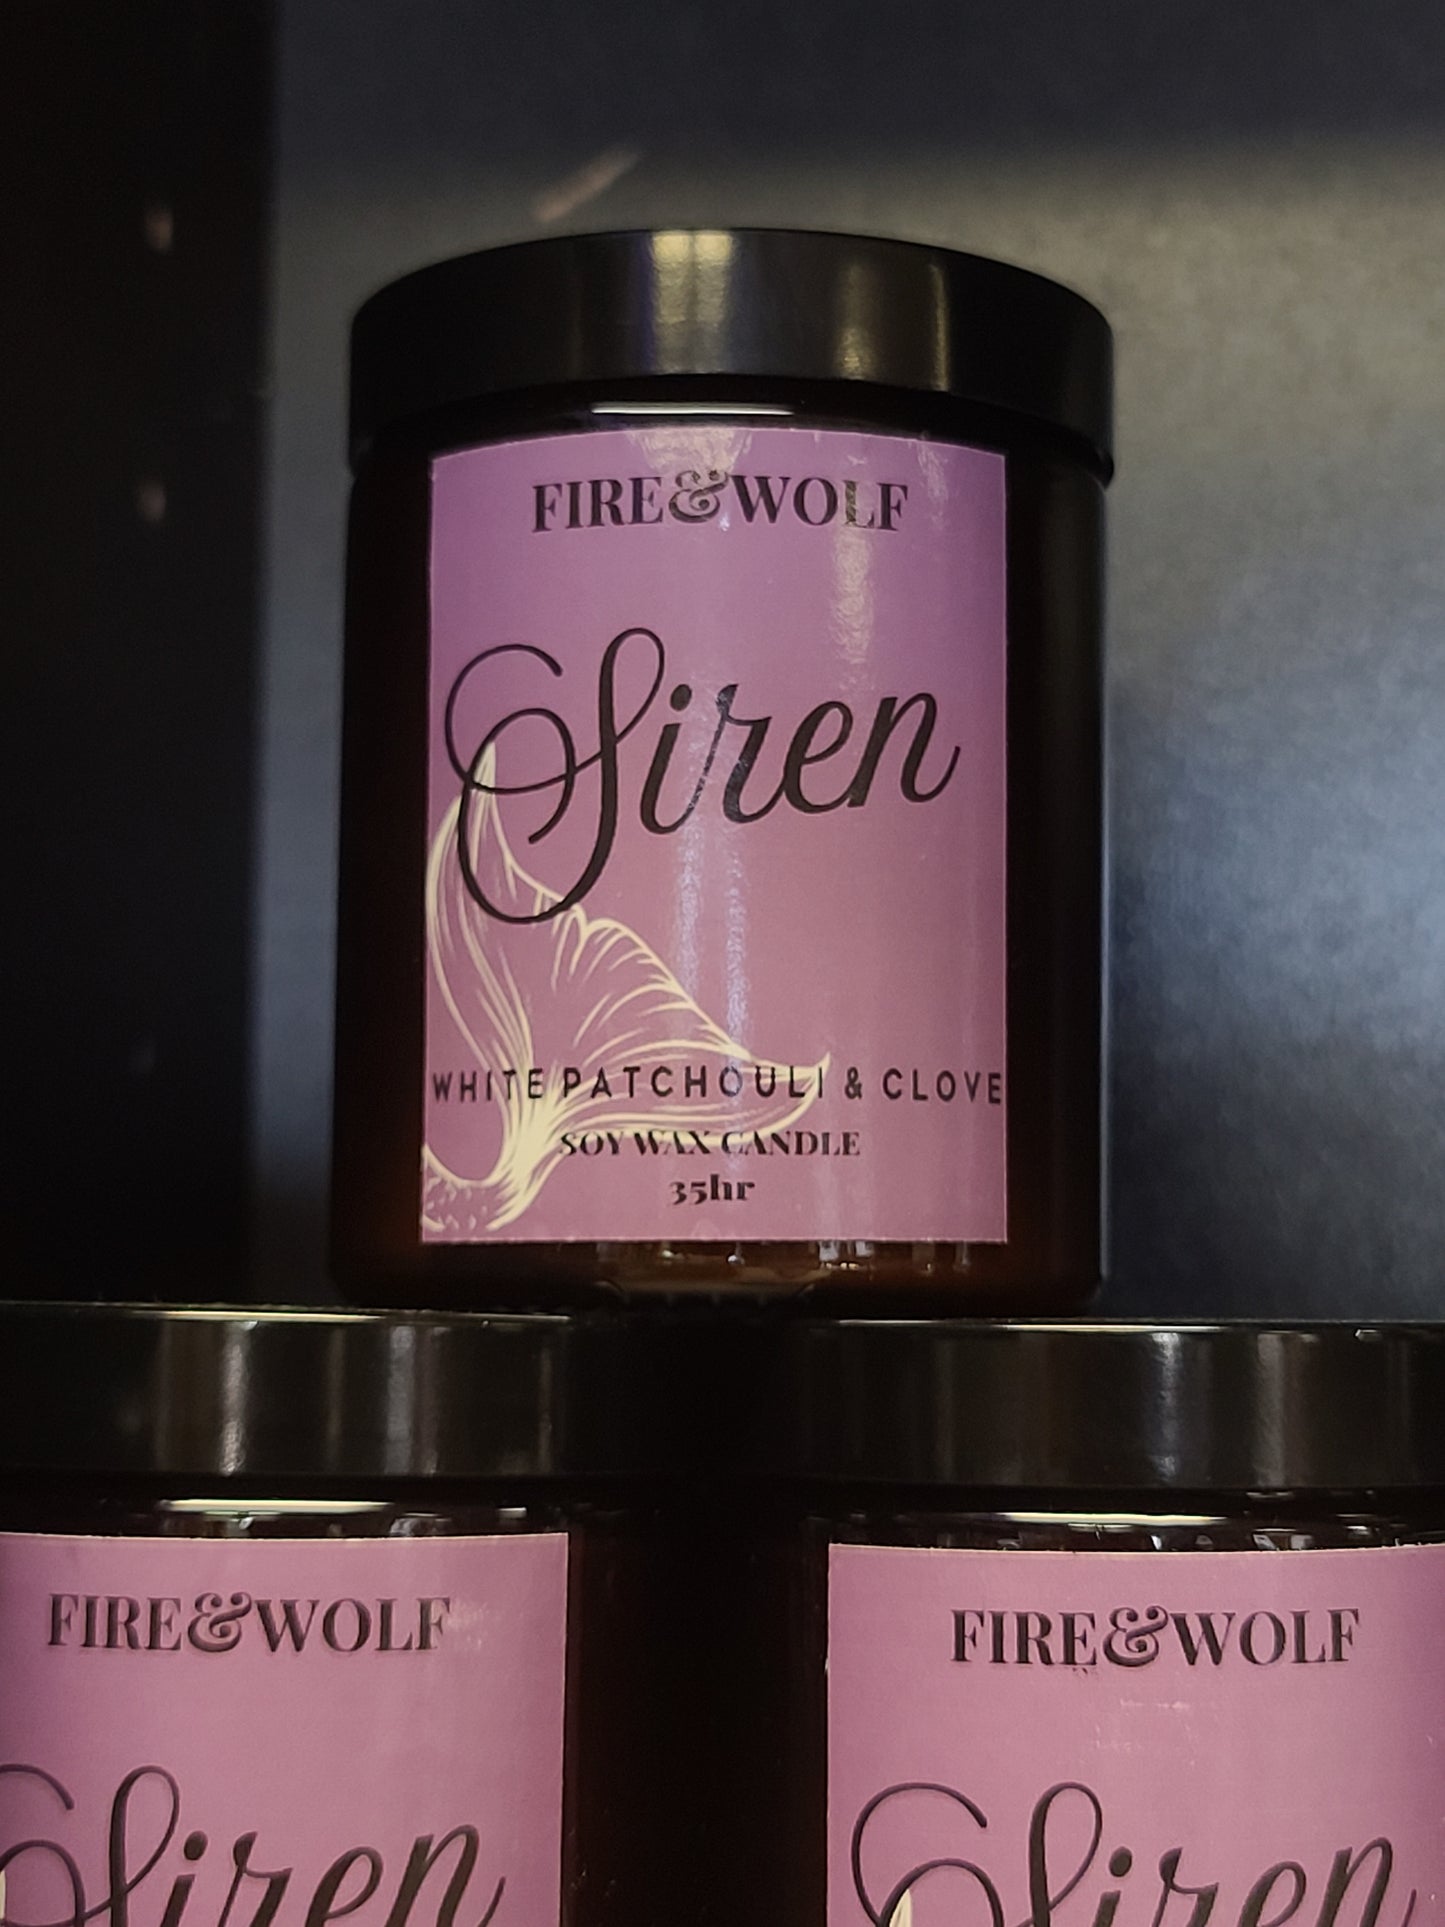 Fire & Wolf - Siren - White Patchouli & Clove Candle